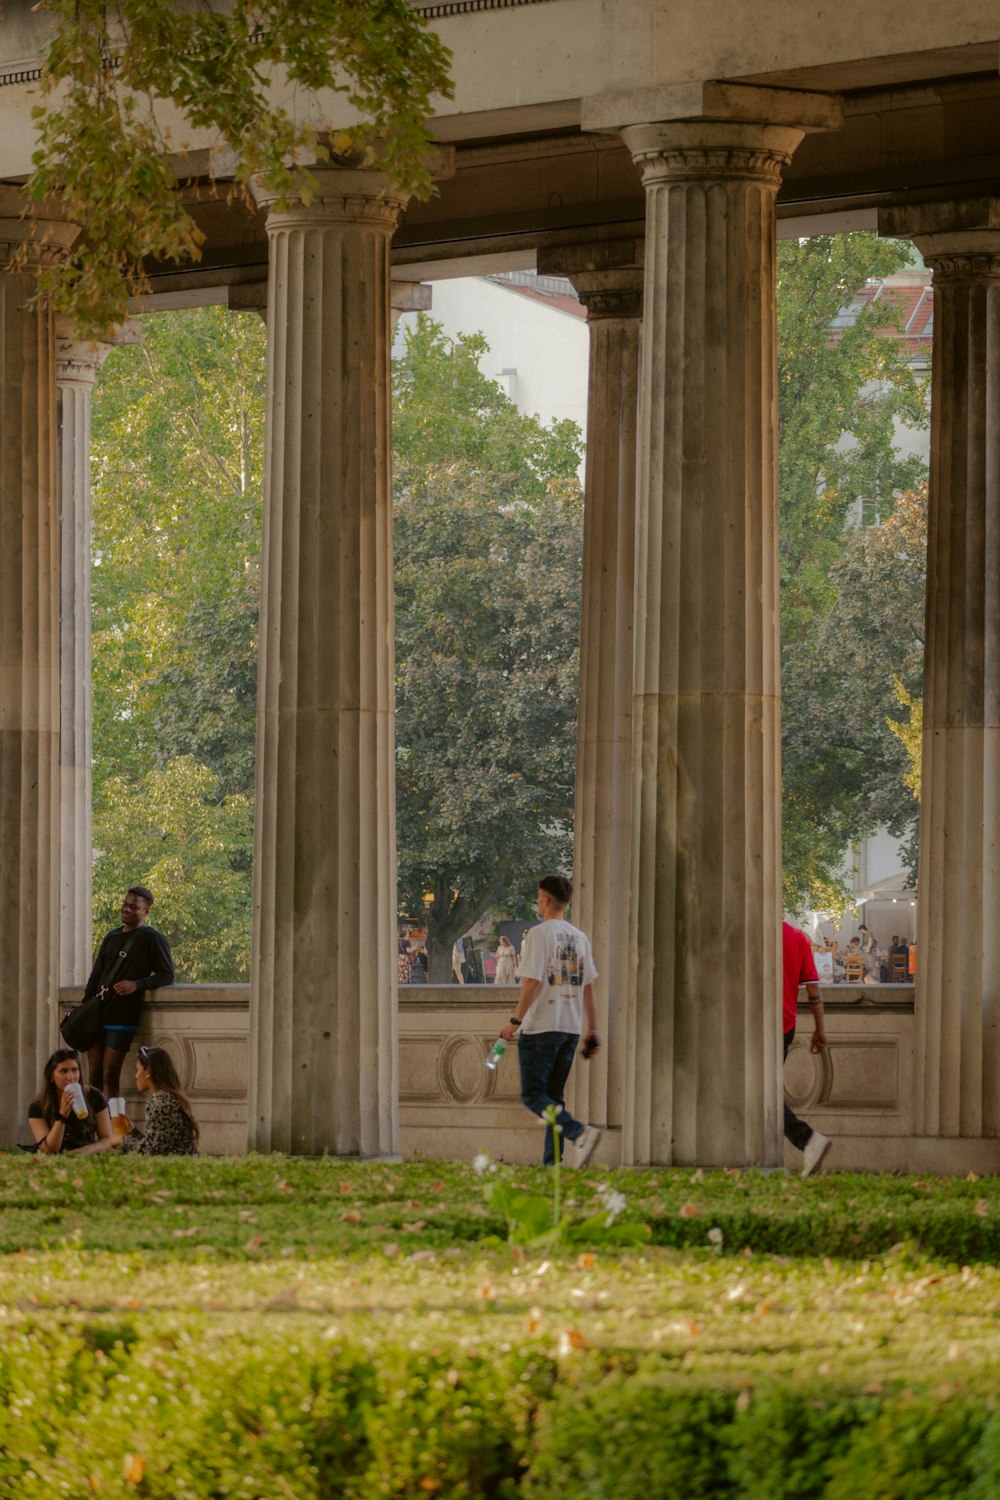 a group of people walking down a sidewalk next to tall pillars